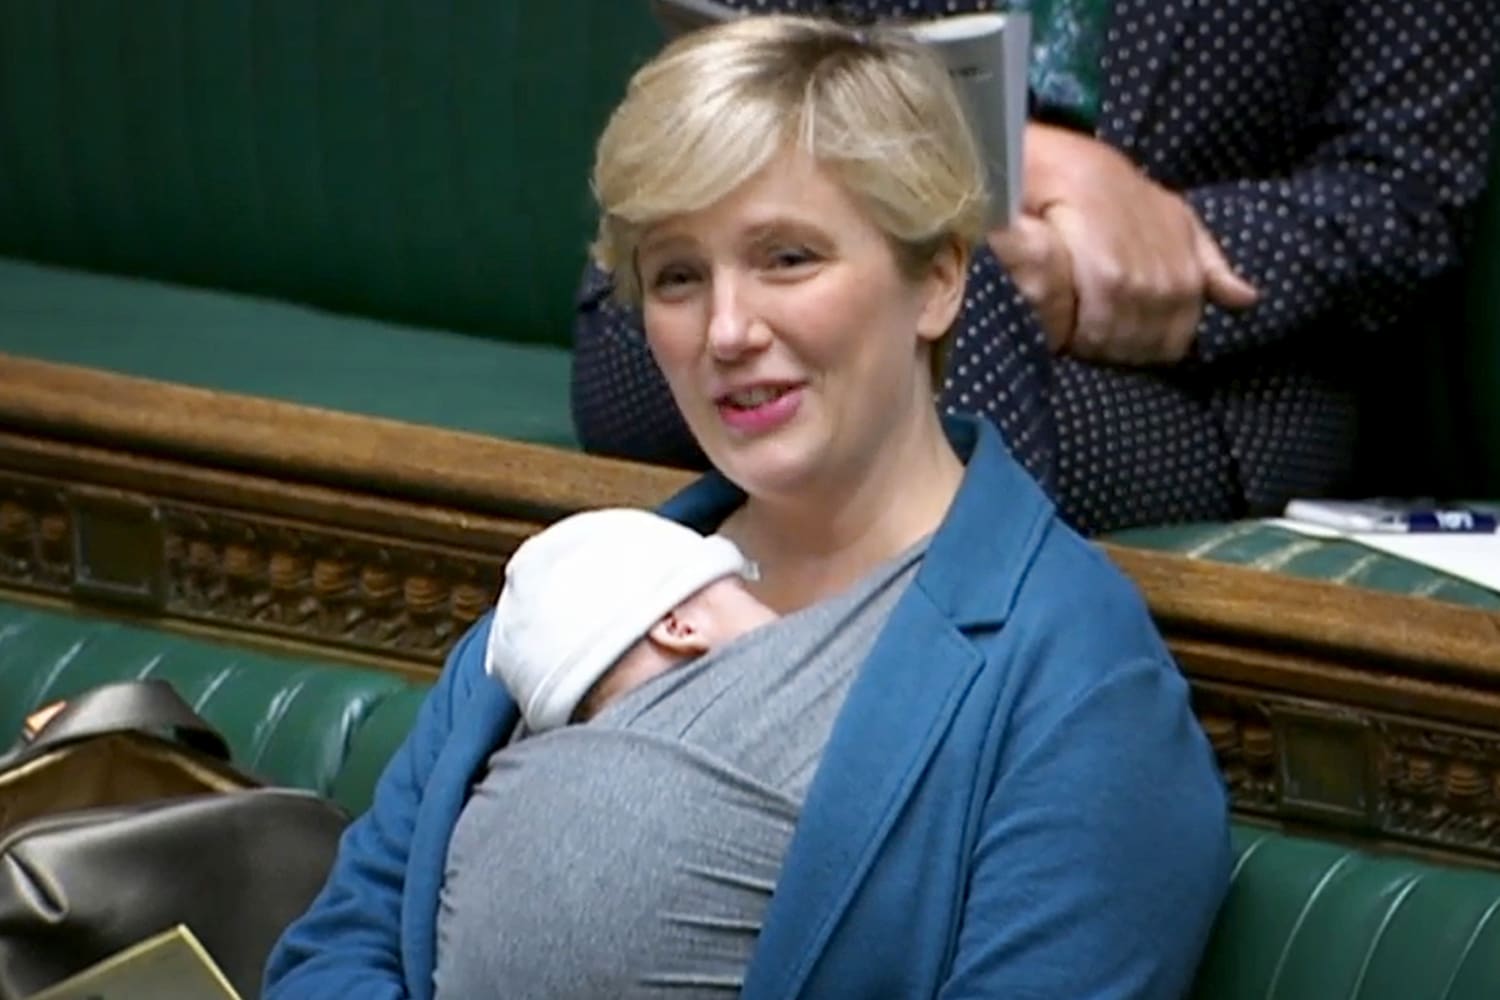 Mother-of-Parliaments?-British-MP-stirs-debate-after-being-told-not-to-bring-baby-to-work